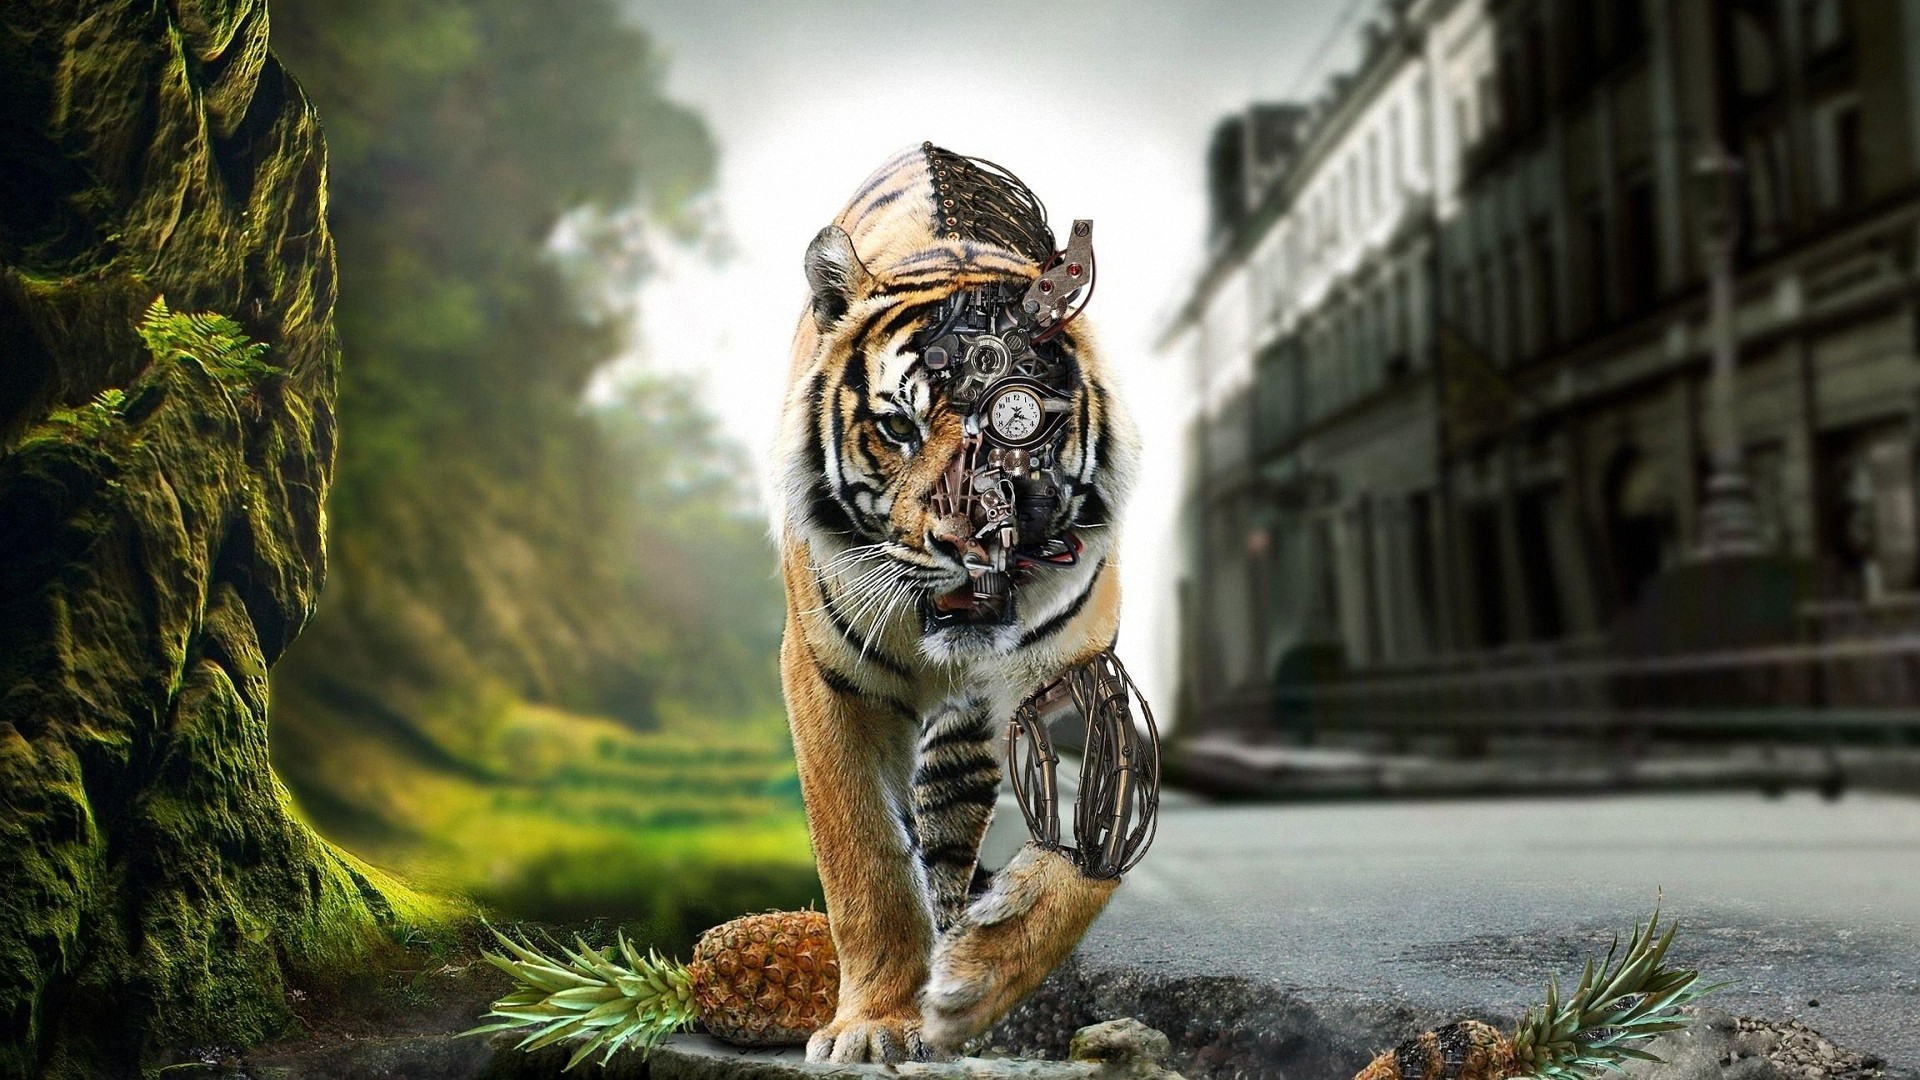 1920x1080 0 1920X1080 Tiger Wallpaper Full HD  Awesome Fantasy Tiger 1080P full  HD Wallpapers